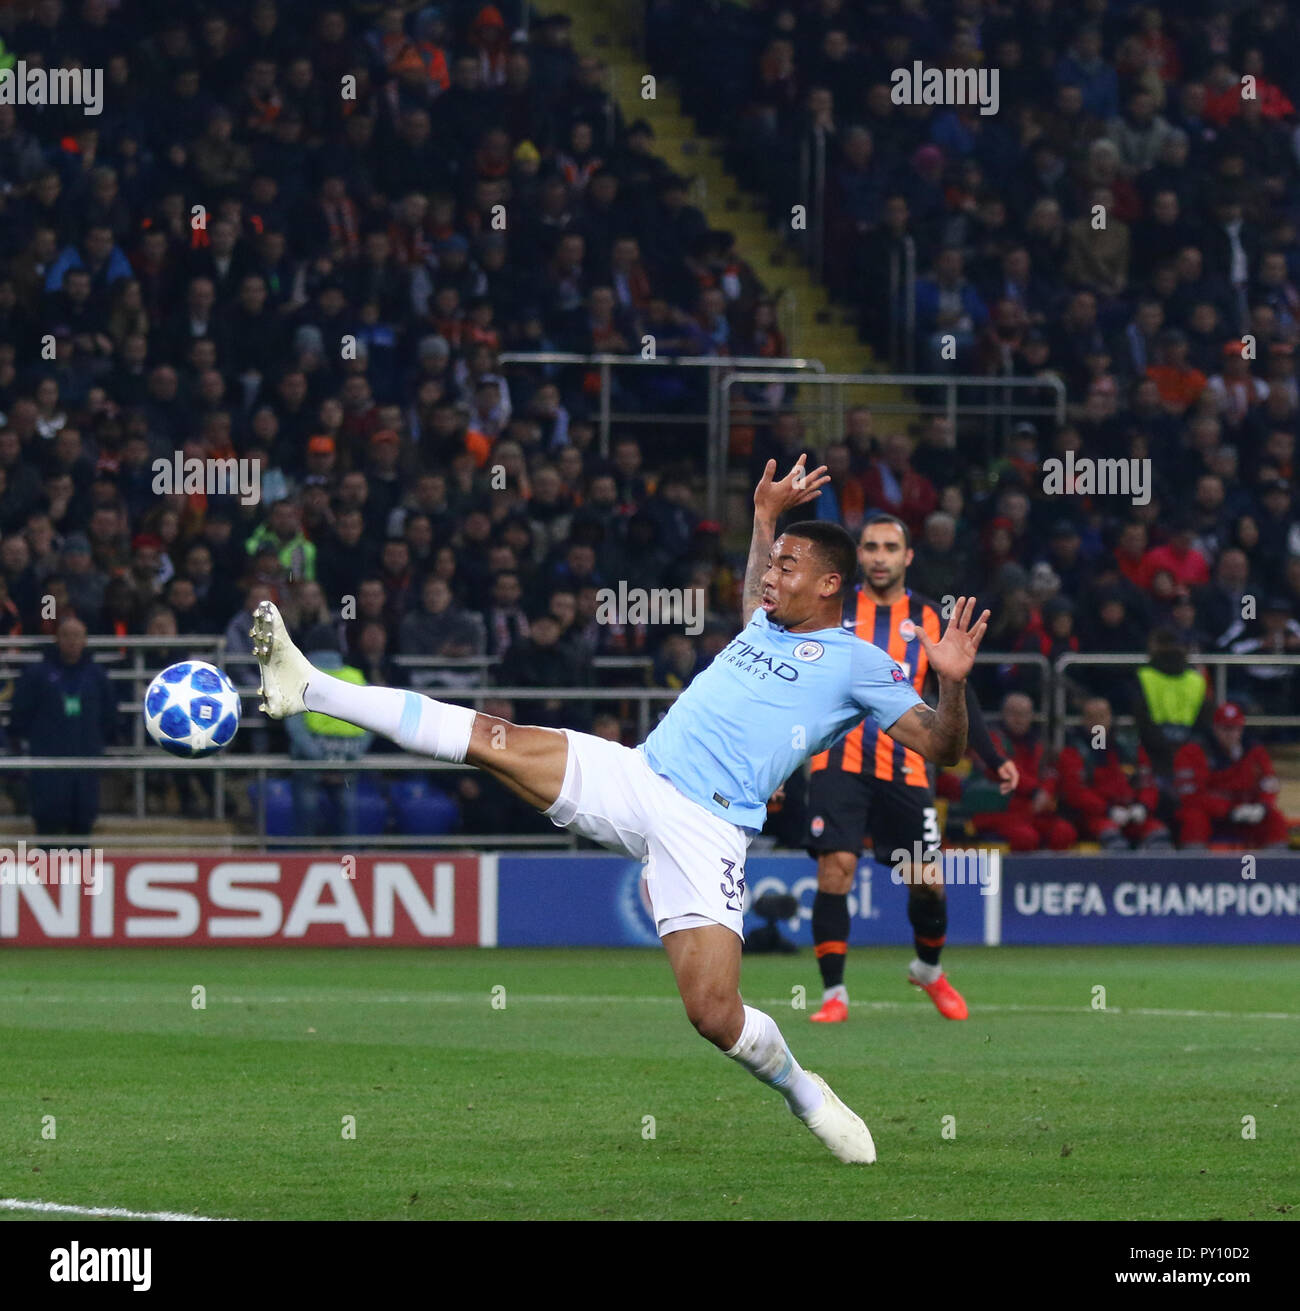 Kharkiv, Ukraine. 23rd October, 2018. Gabriel Jesus of Manchester City in action during the UEFA Champions League game against Shakhtar Donetsk at OSK Stock Photo